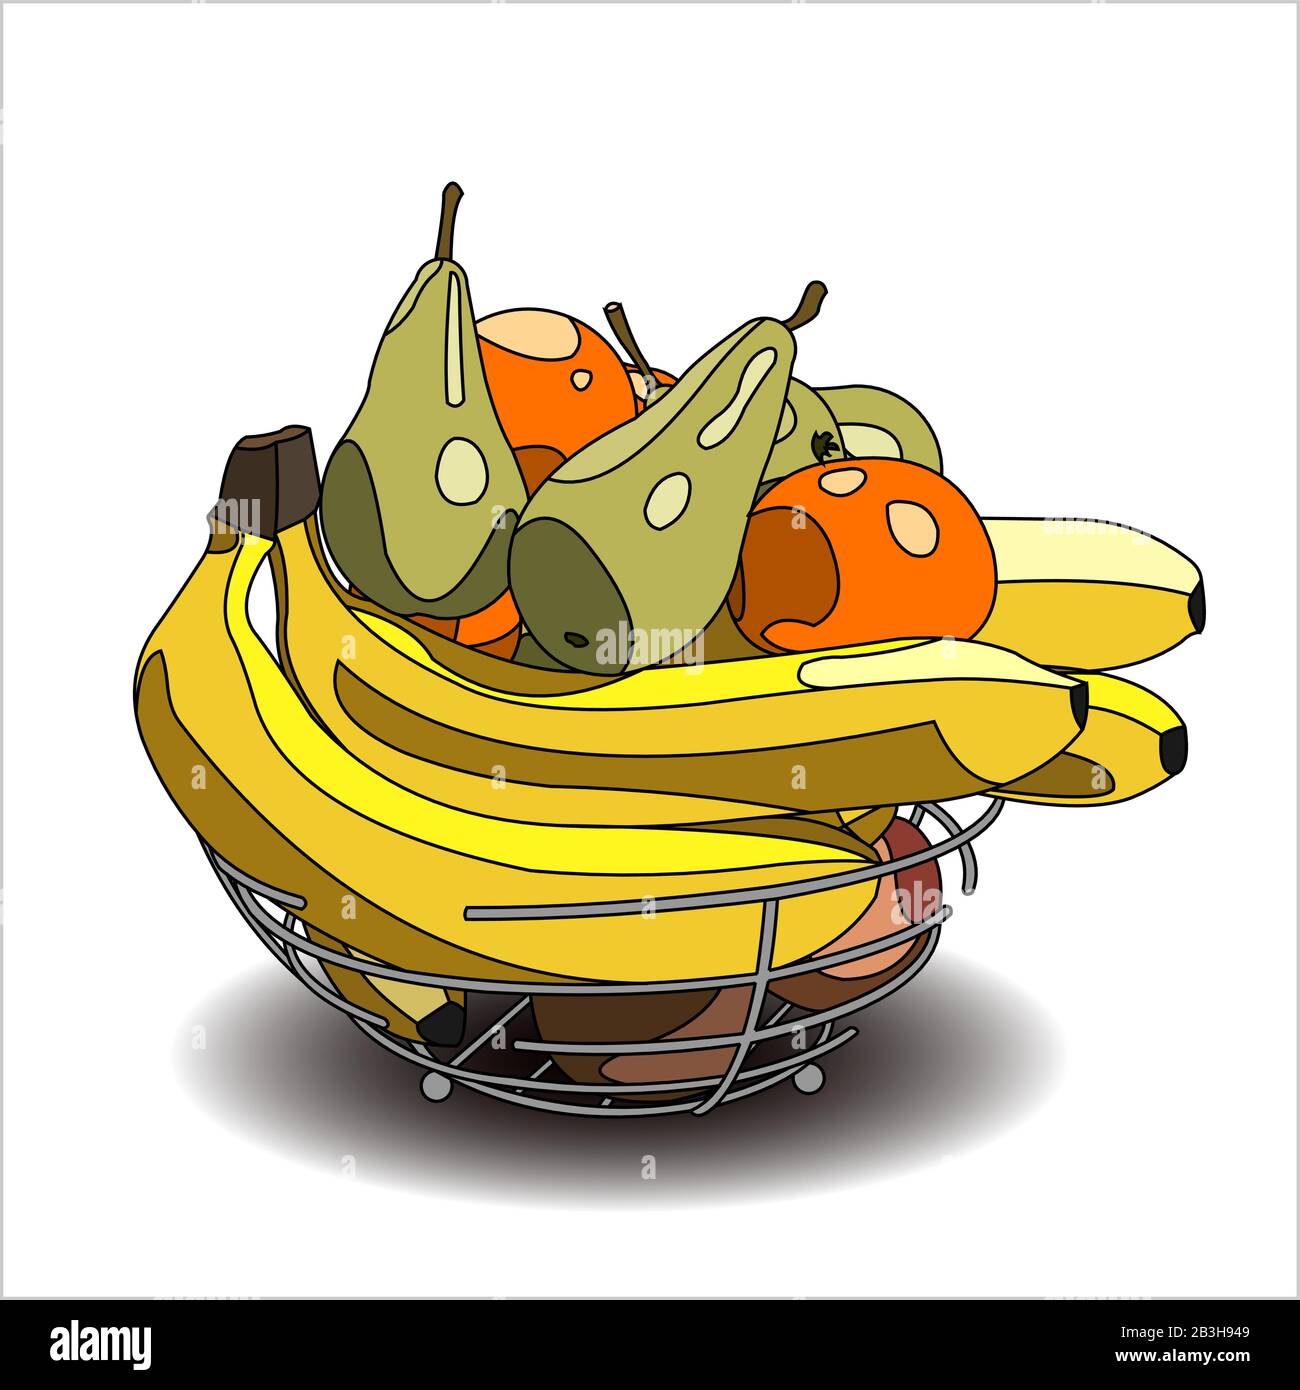 A Bowl of Fruit. A Lot Of Different Fruits. Banana, Pear, Orange, Mandarin, Apple. Vector Image on a white background. Stock Vector